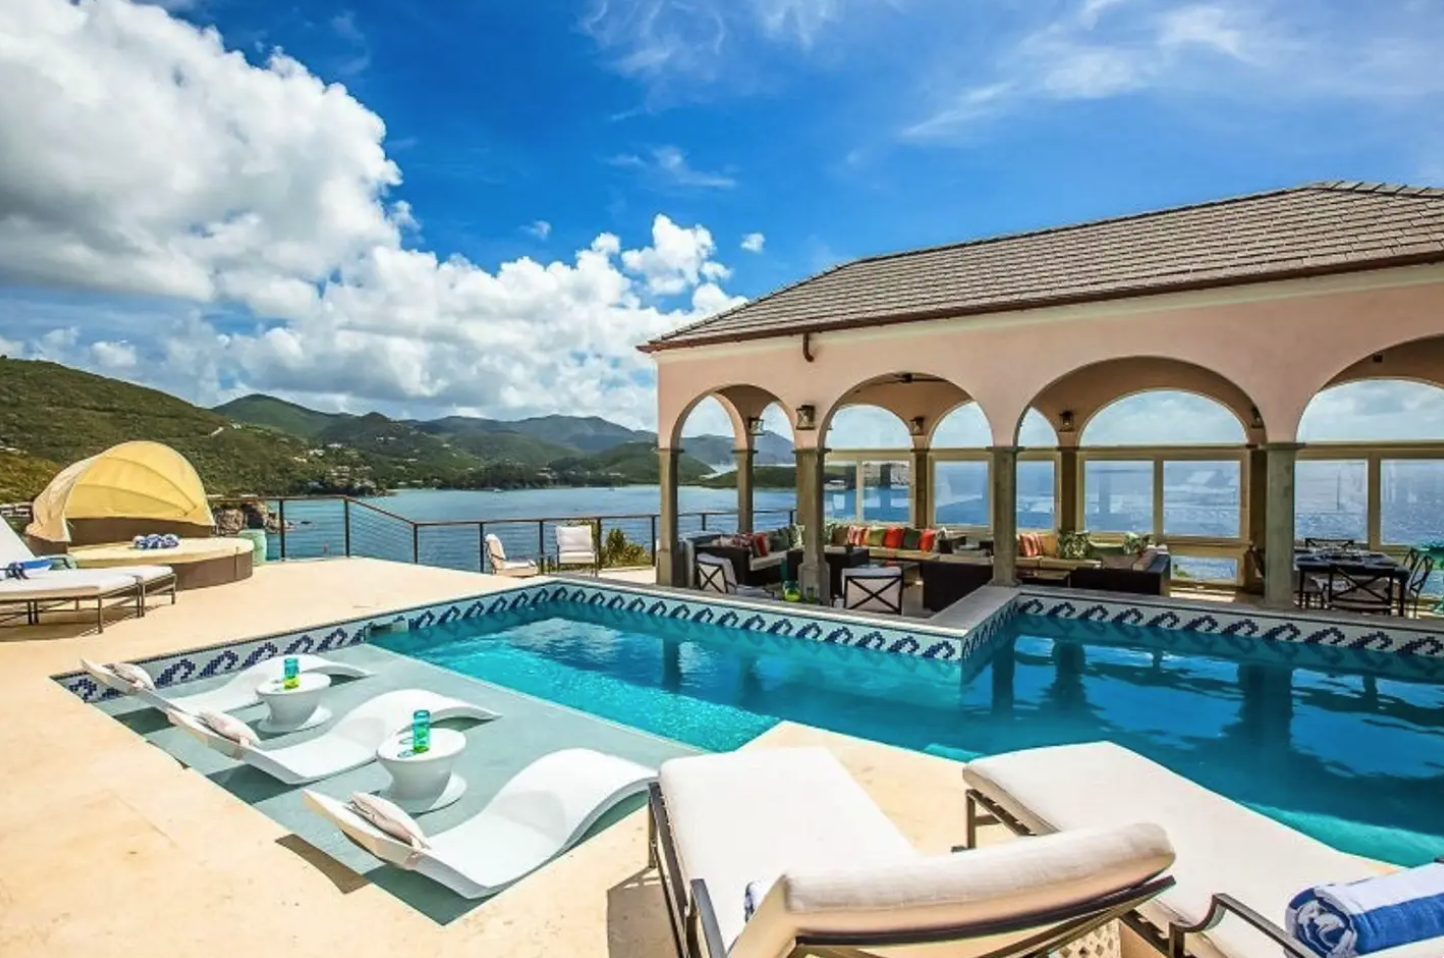 Pool deck of "Finisterre" - a two-acre, three-building complex on St. John